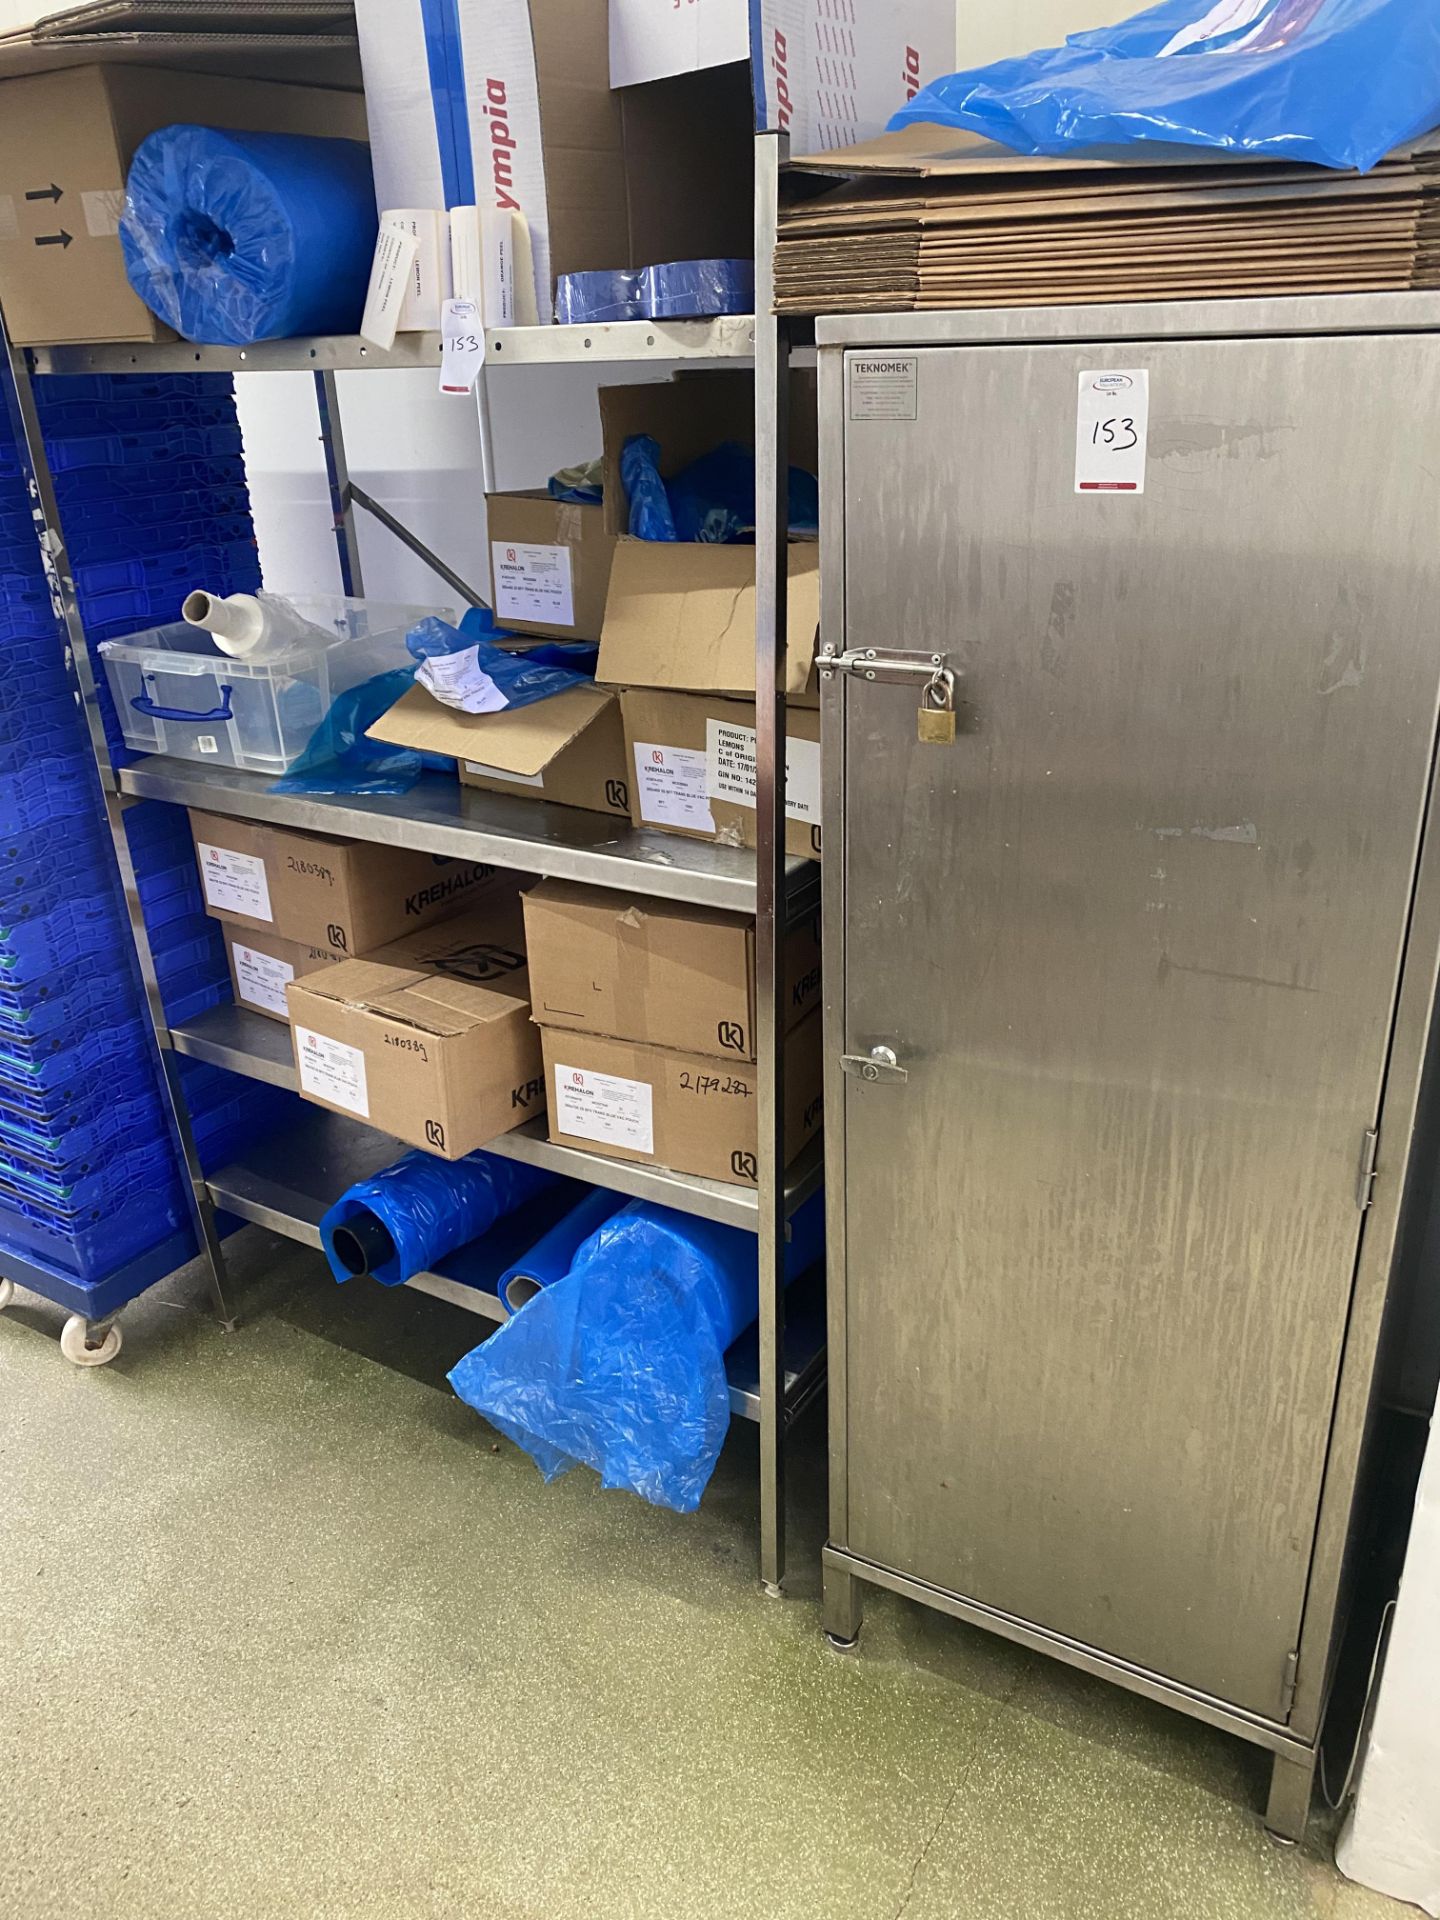 Lockable stainless steel cabinet and a stainless steel shelfing unit